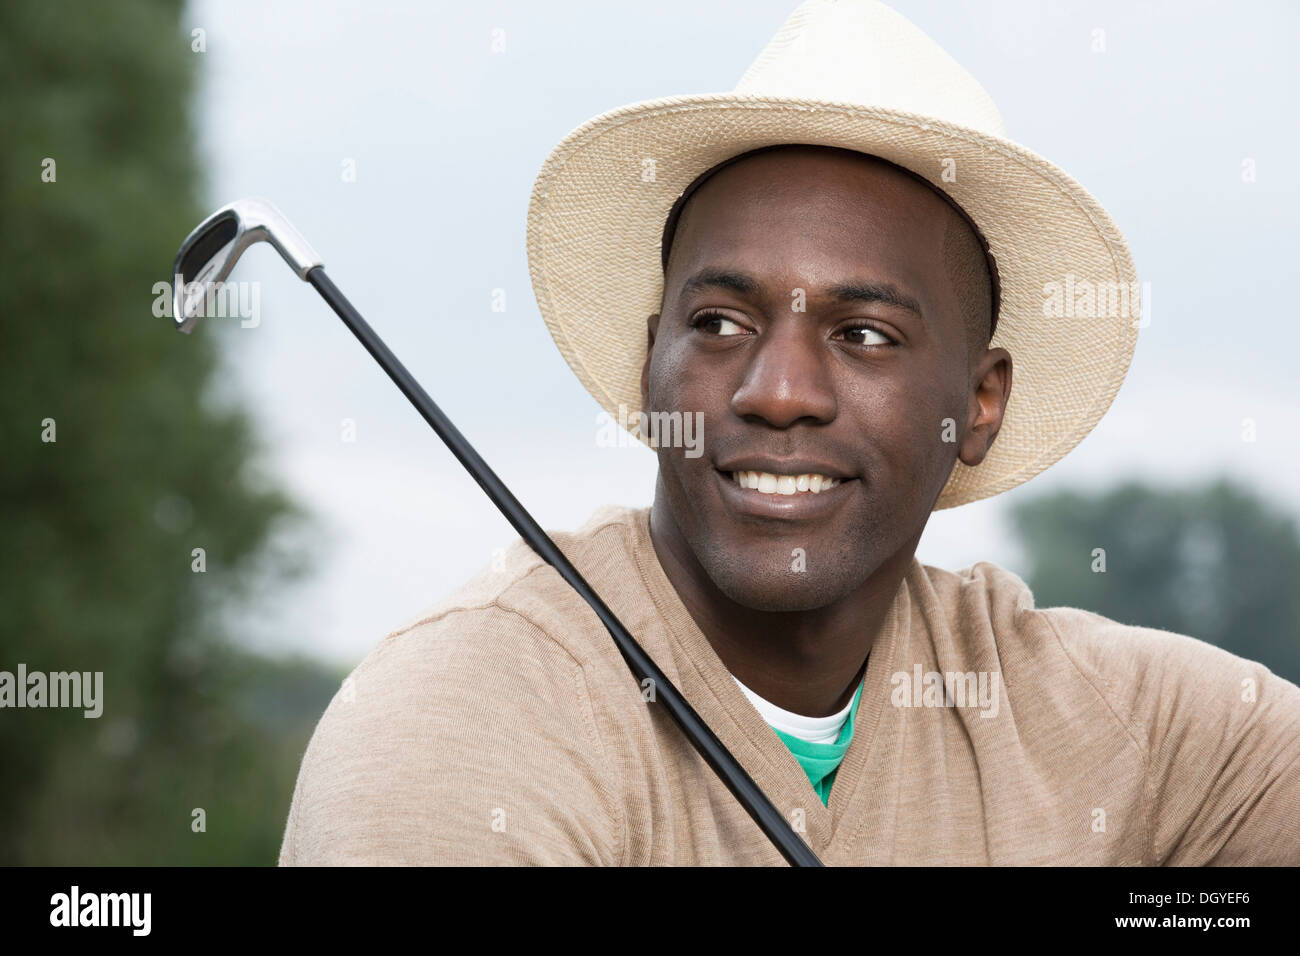 Man relaxing at the golf course Stock Photo